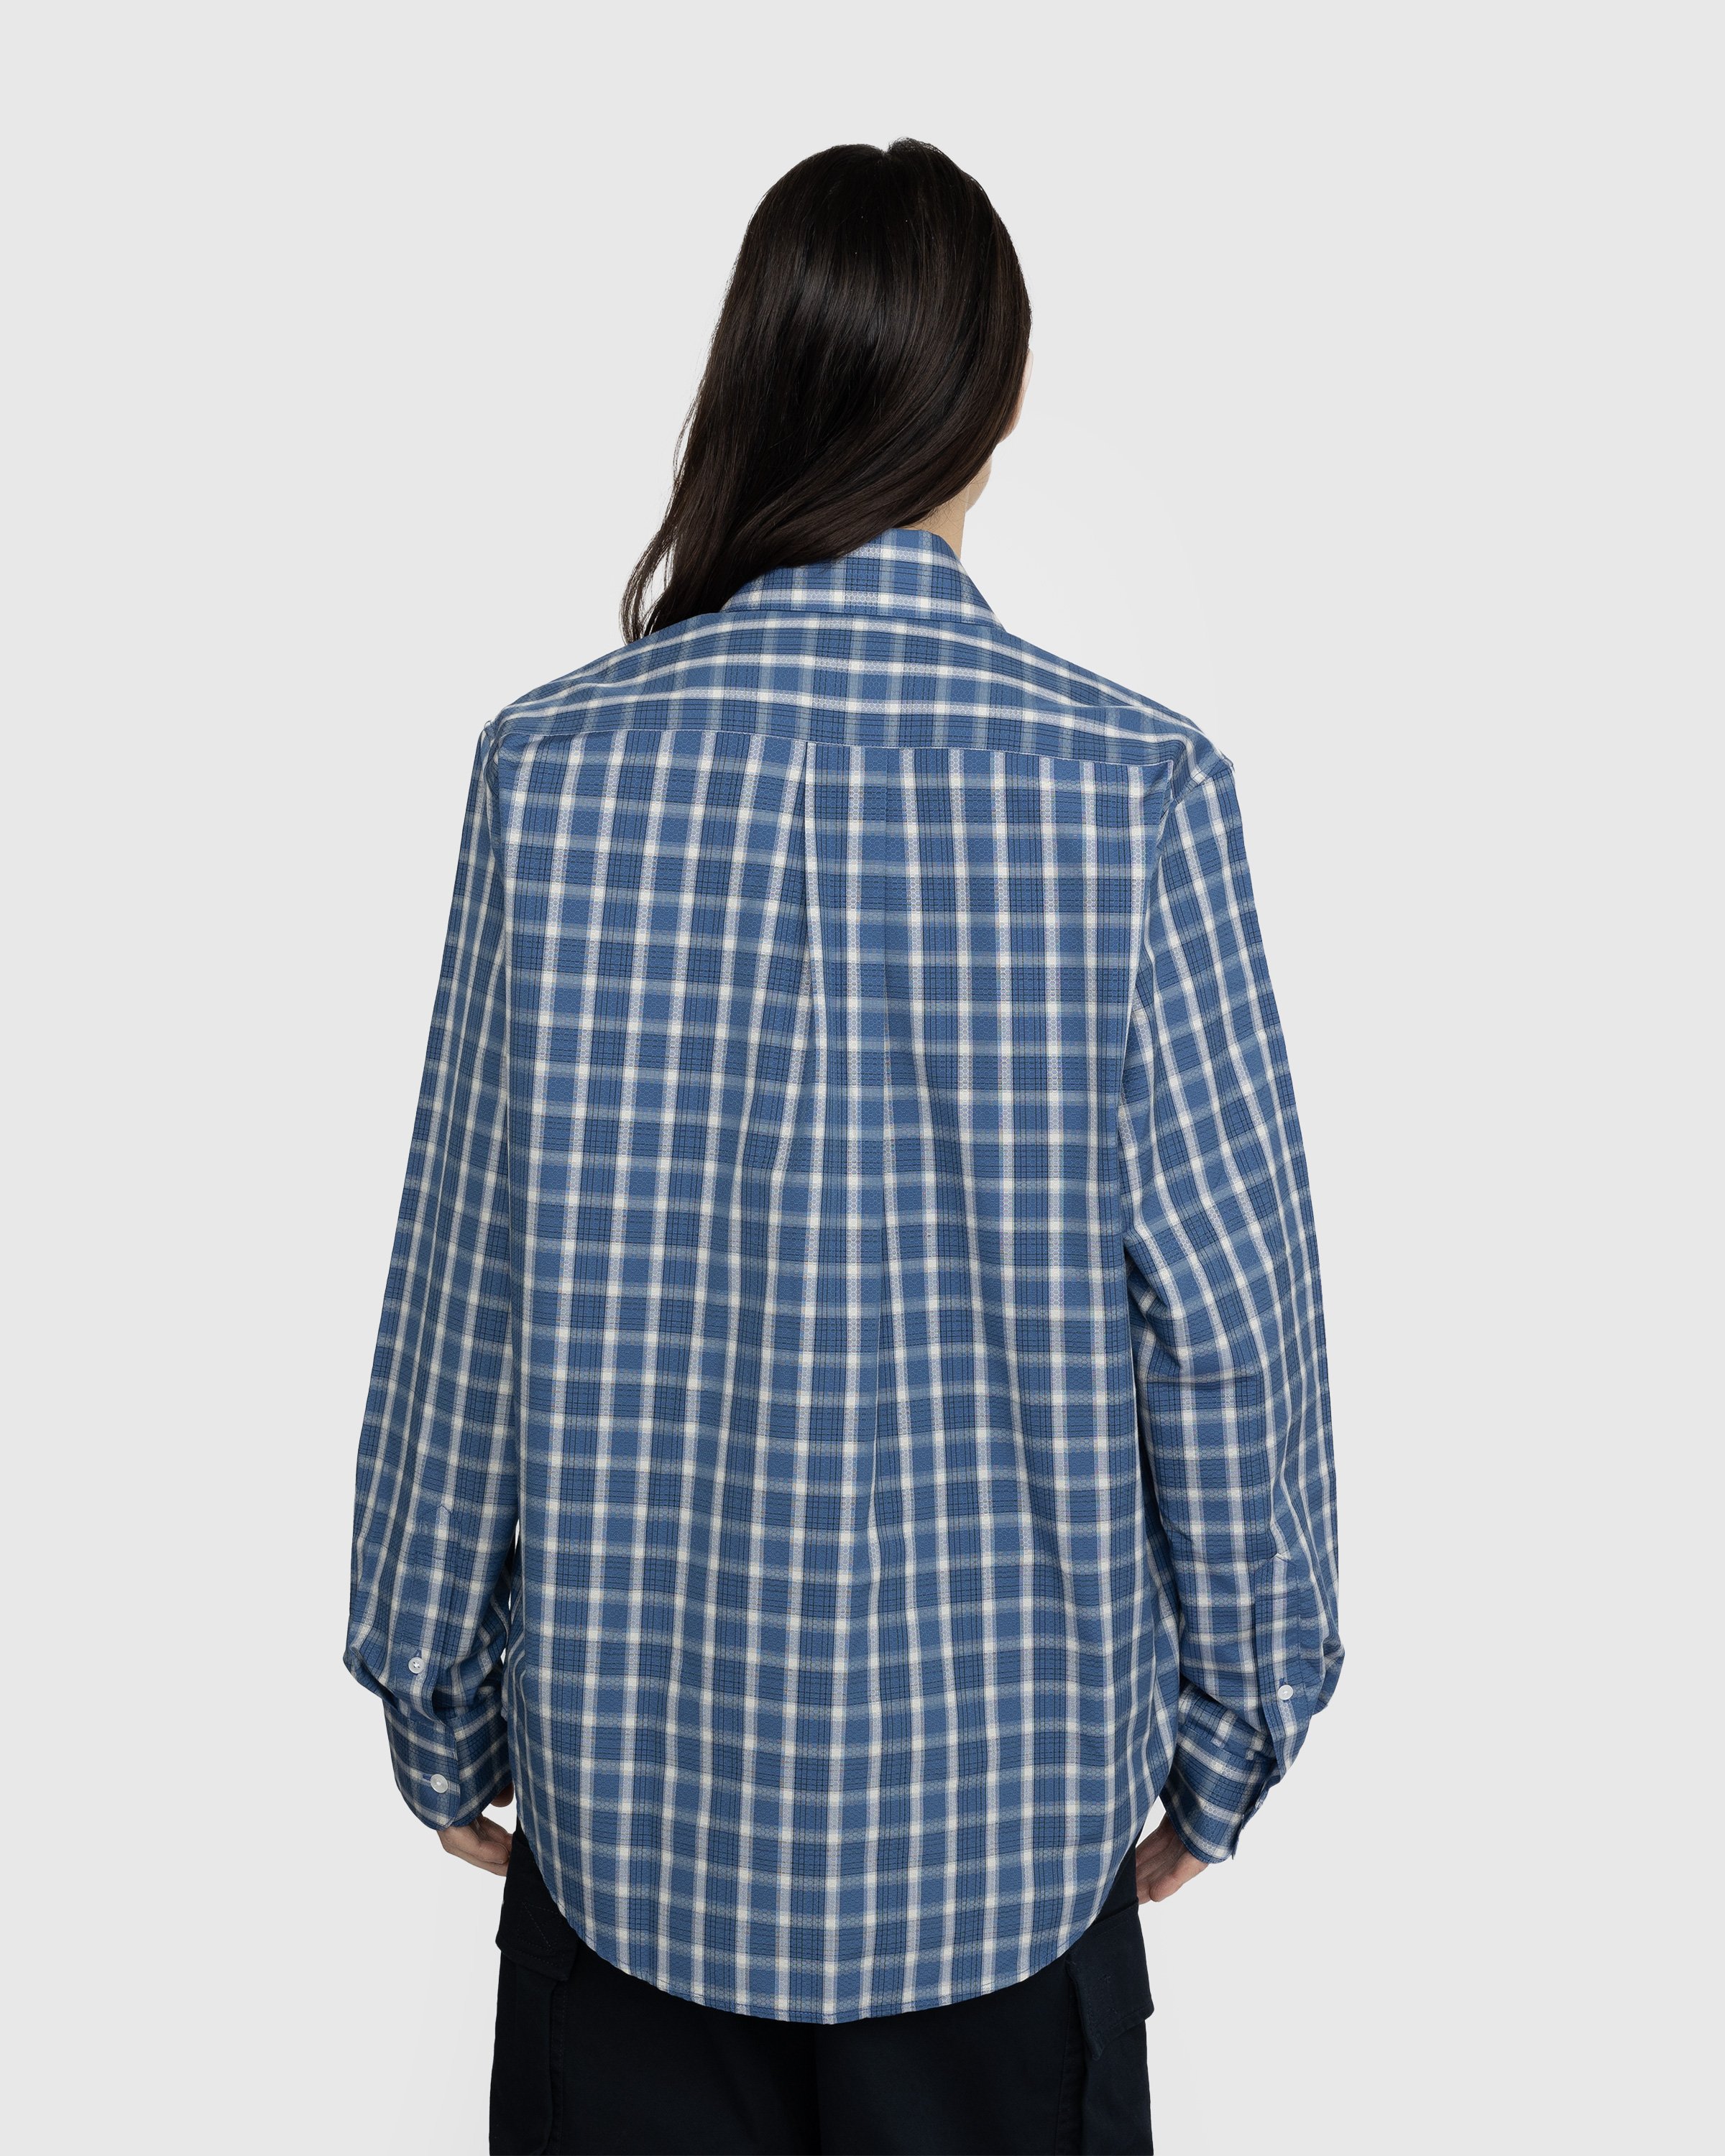 Martine Rose - Classic Check Button-Down Shirt Blue - Clothing - Blue - Image 3